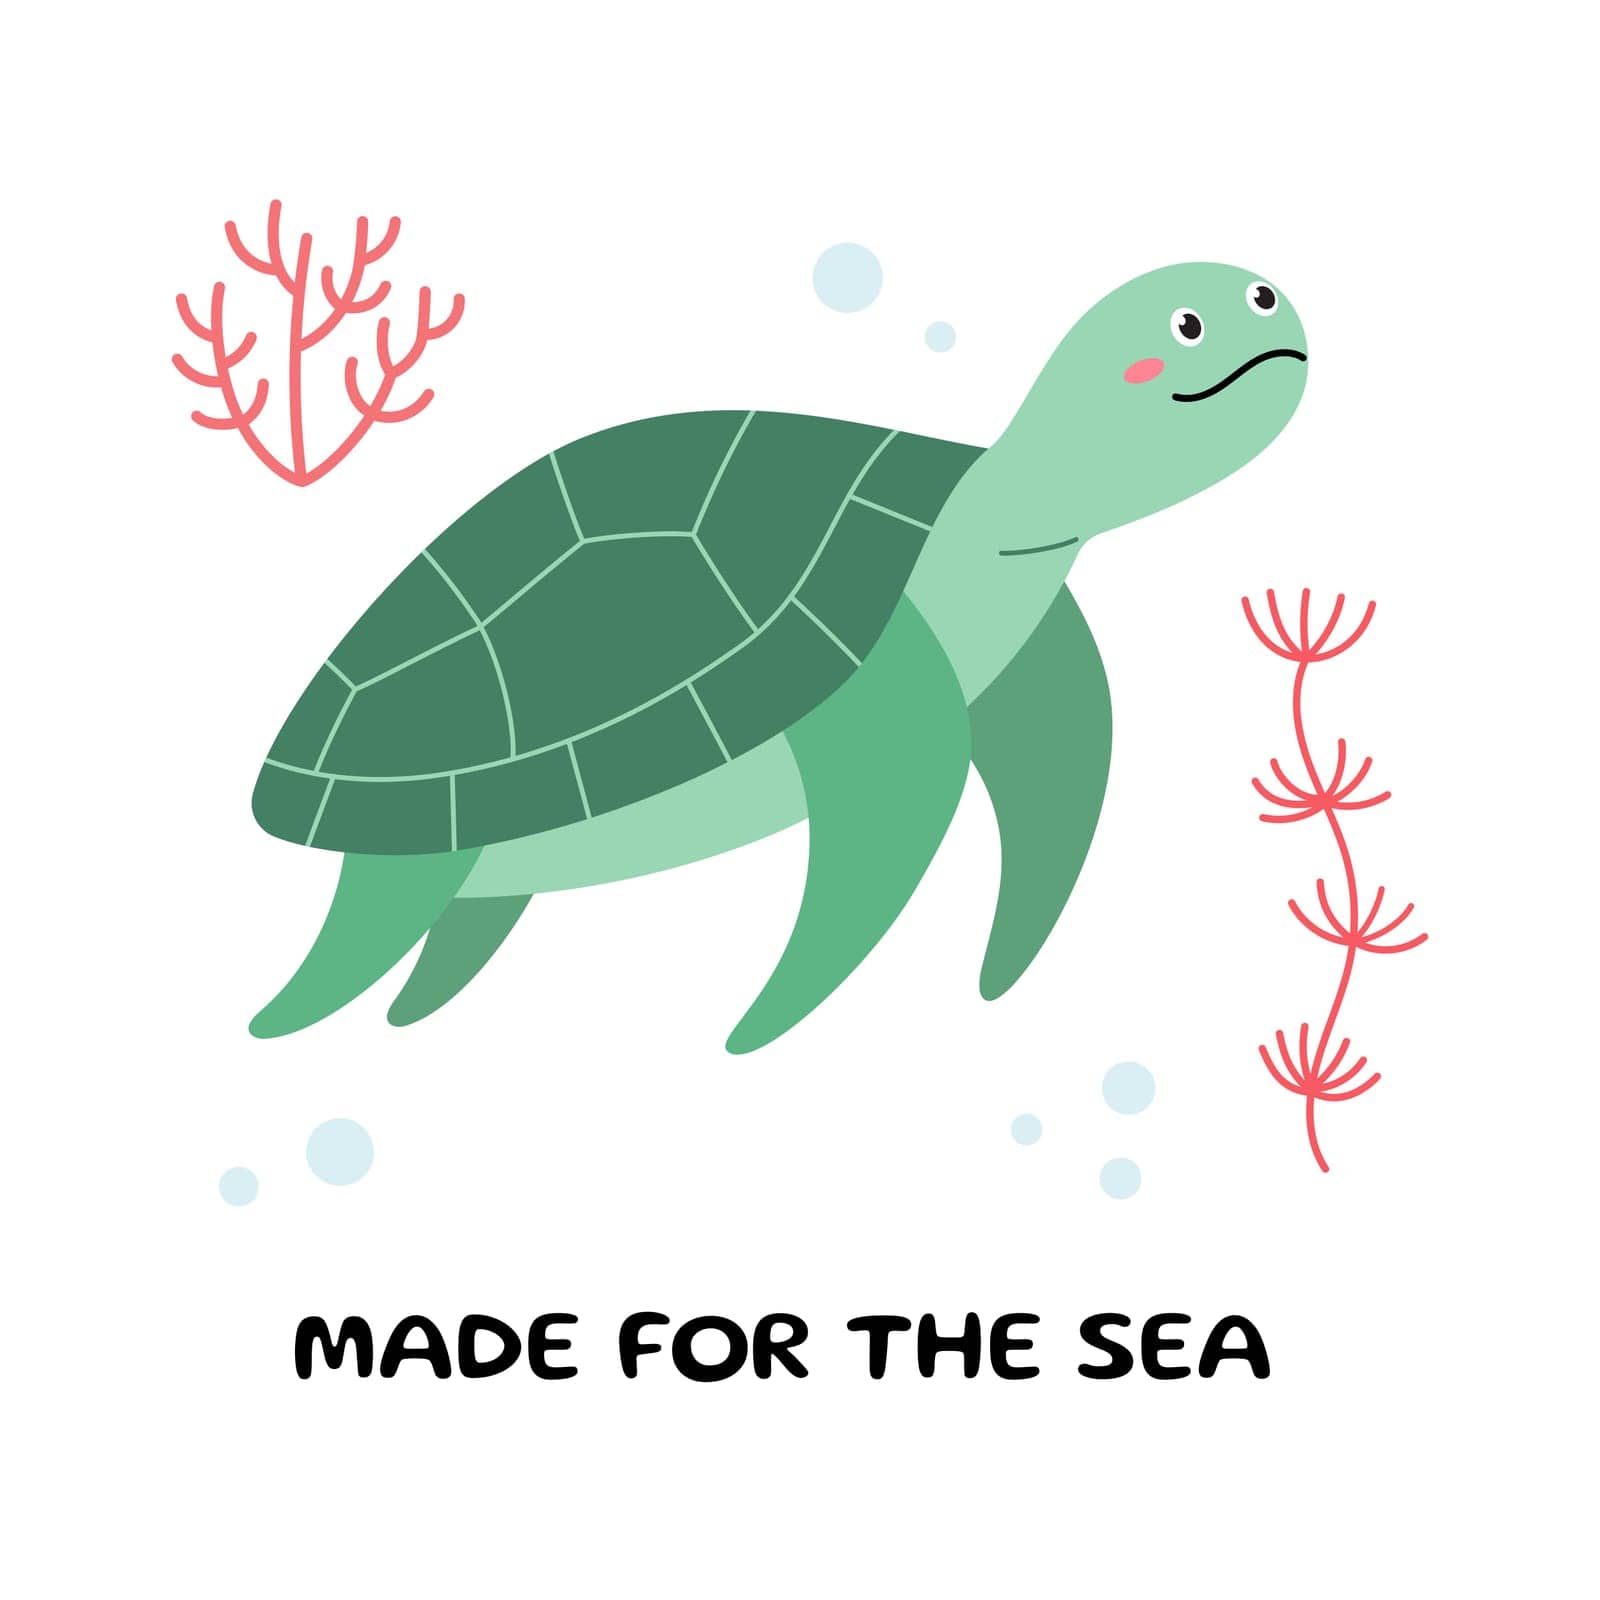 Cute cartoon turtle. Postcard with Sea turtle. Vector illustration of a sea turtle. Kids illustration in cartoon style by KateArtery19